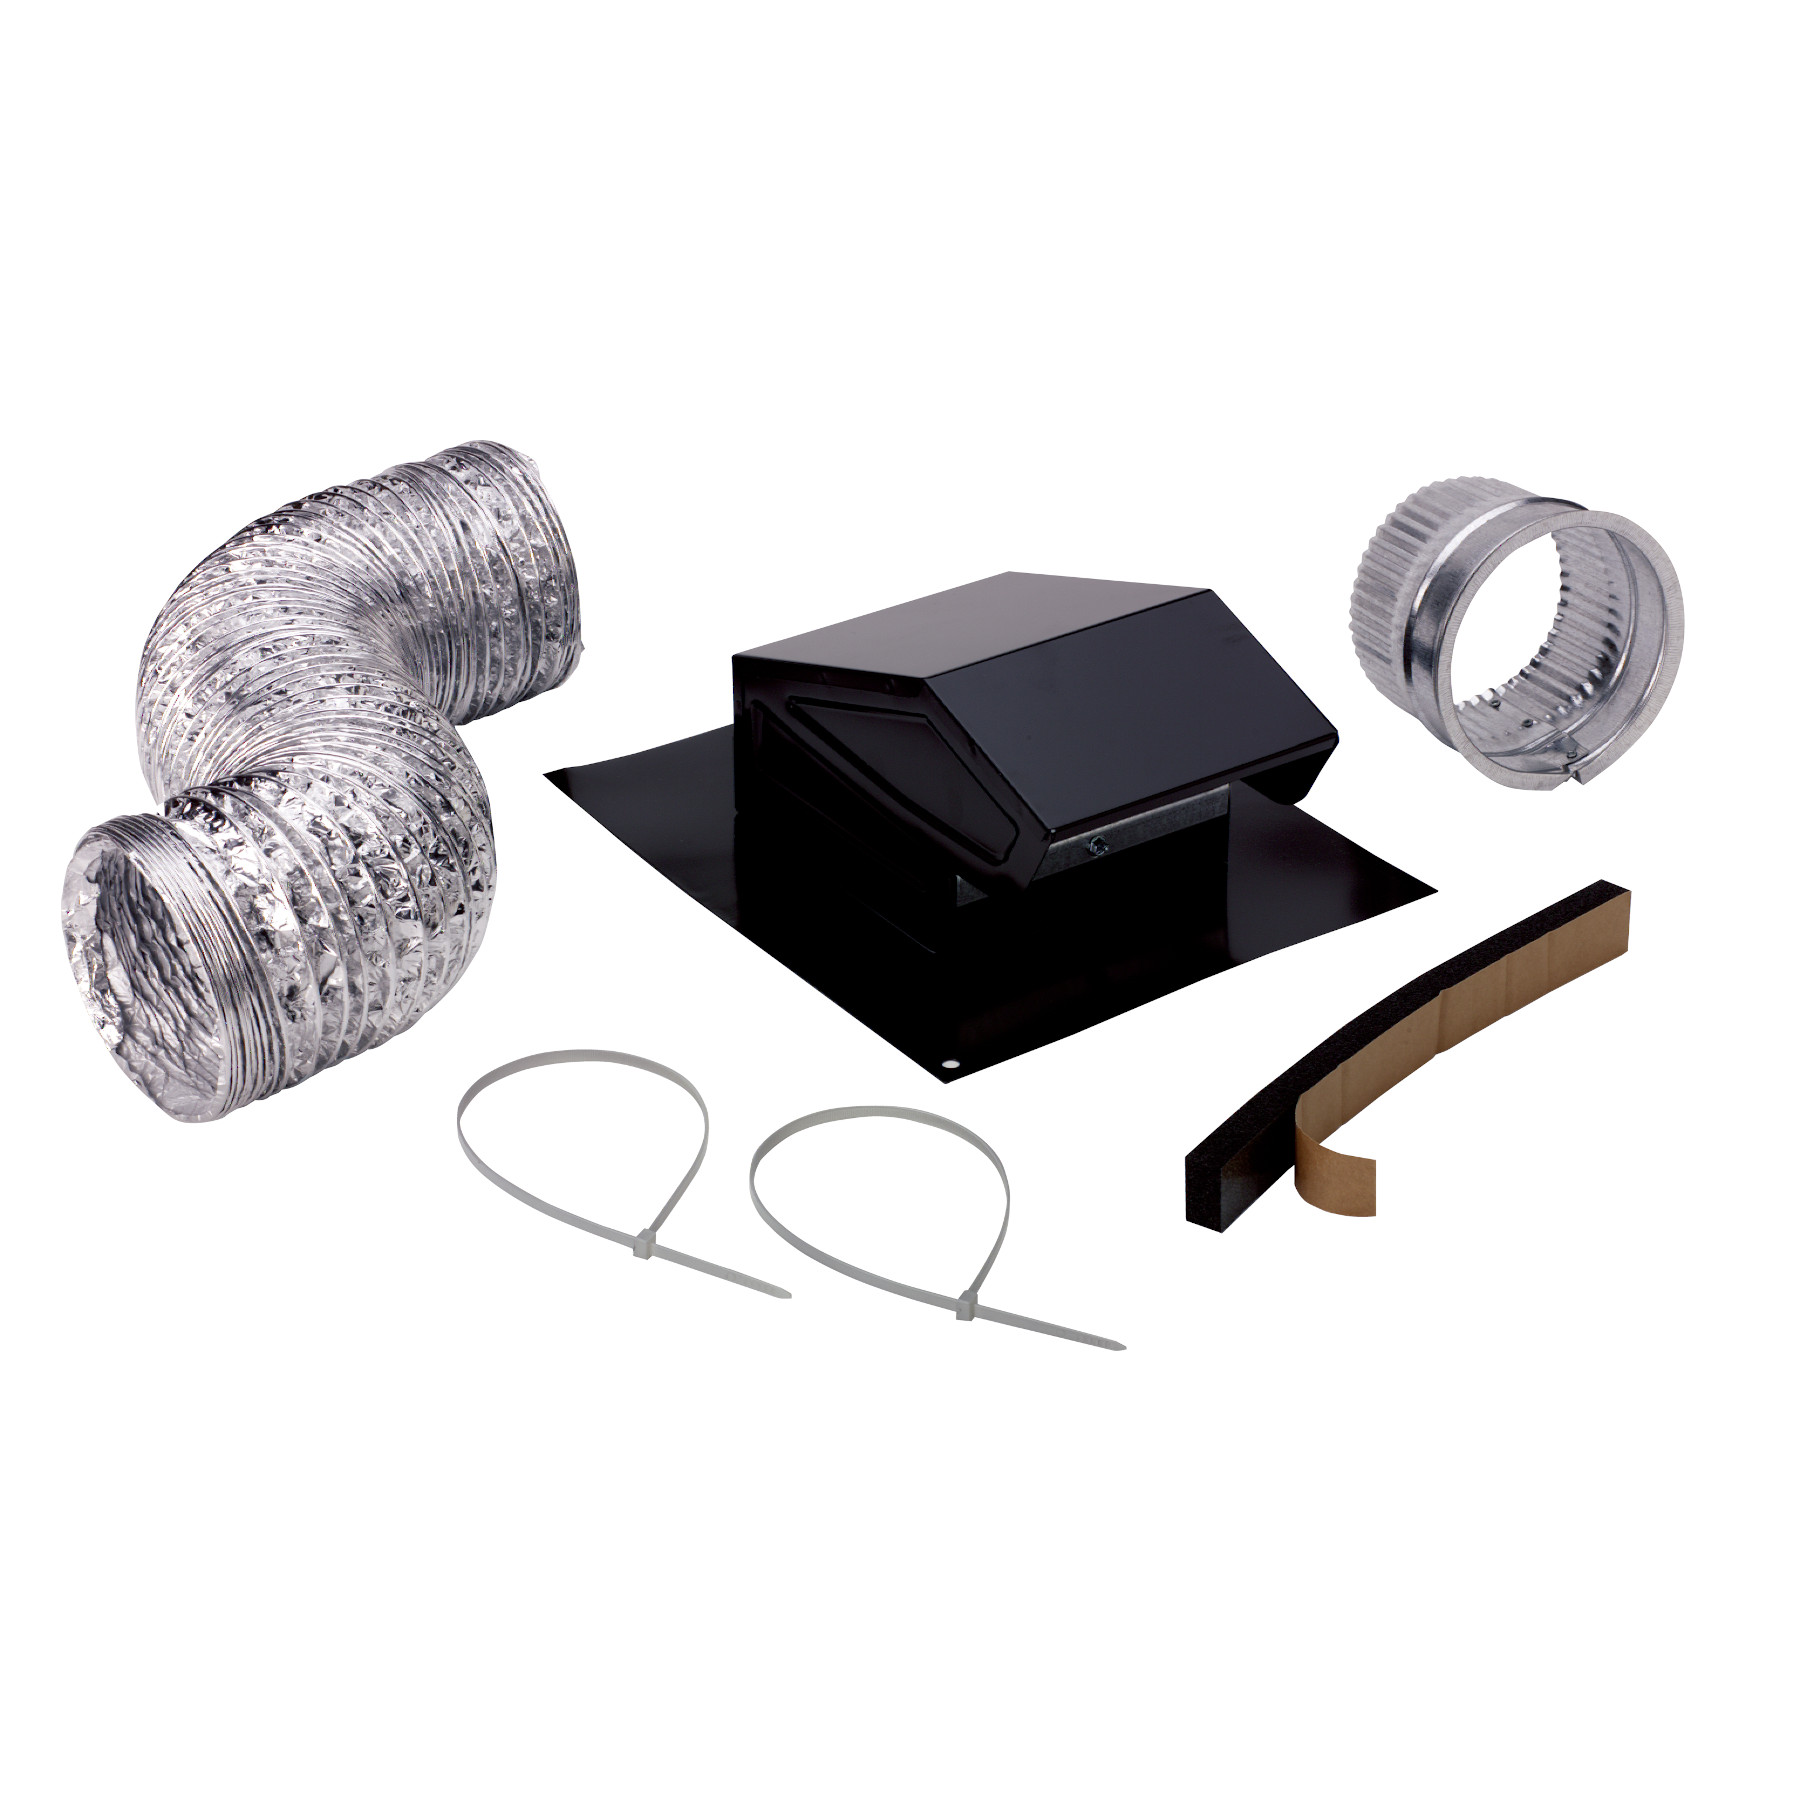  Broan-NuTone® Steel Roof Vent Kit for 3" or 4" Round Duct, Includes Flexible Ducting, 4" to 3" Reducer, Duct Connector 